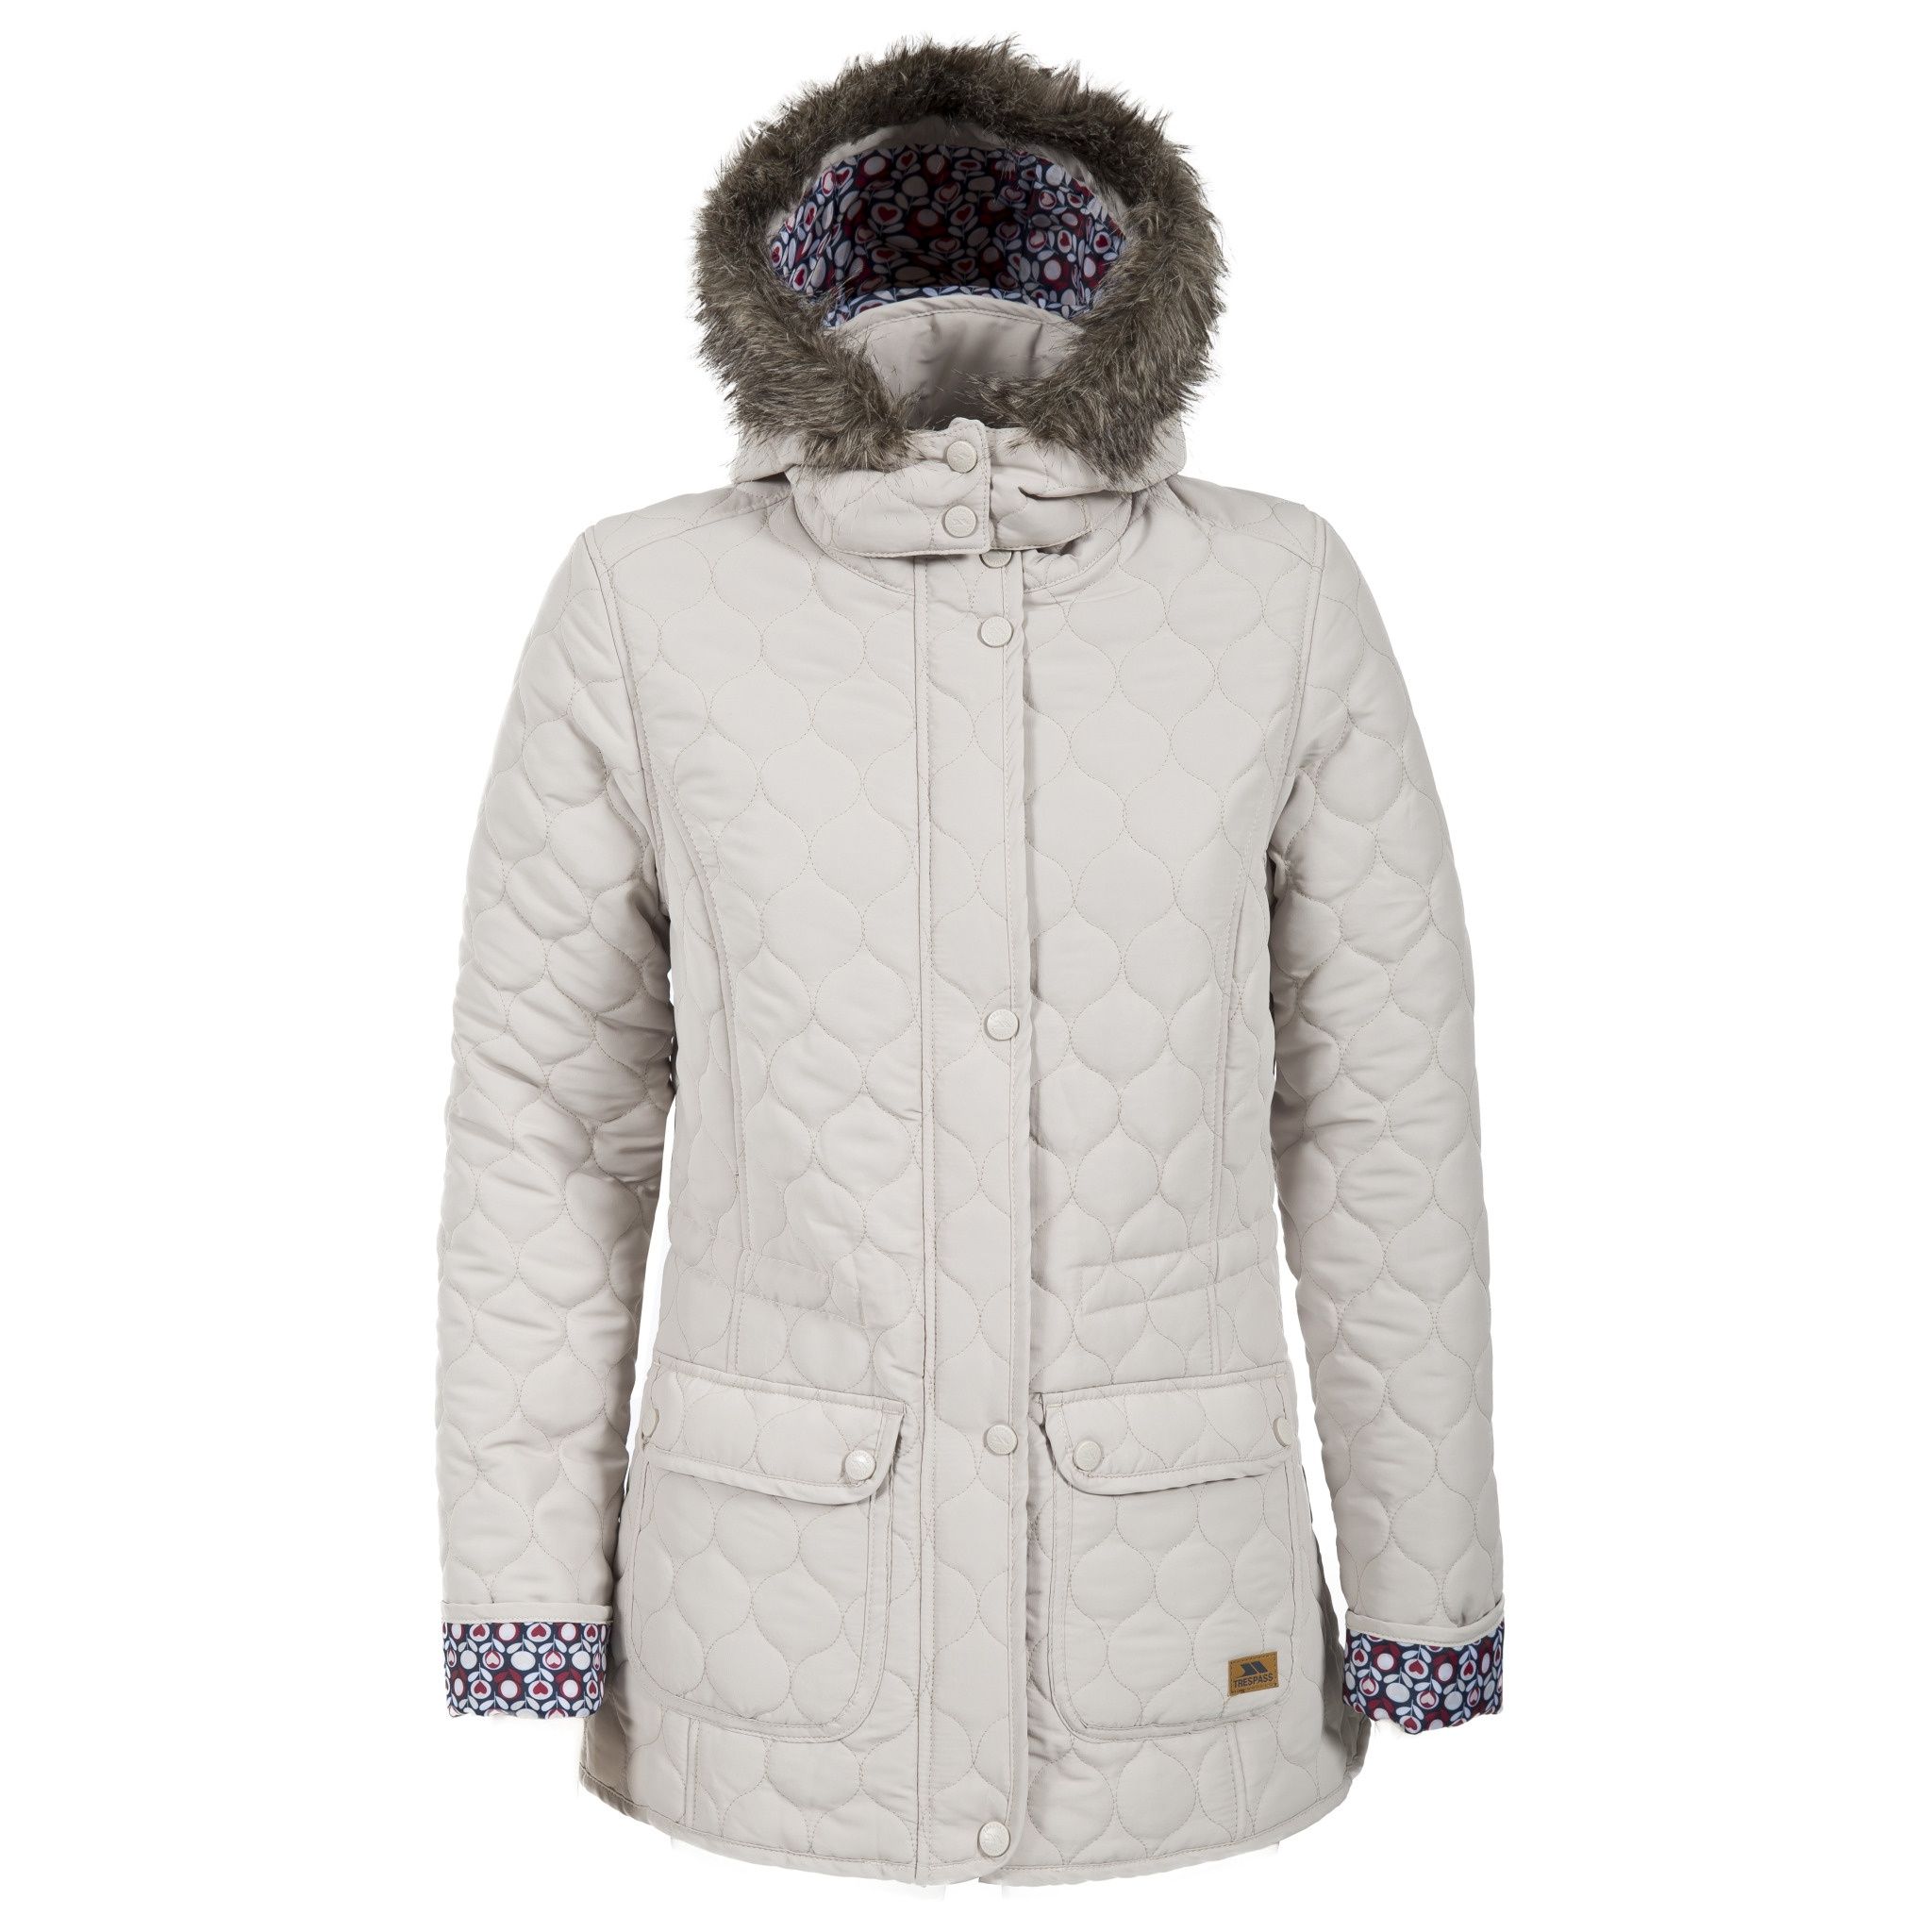 Womens padded coat. Onion quilted stitching. 2 stud fastening waist pockets. Detachable hood with fur trim. Drawcord at waist. Printed lining. Material composition: shell- 100% Polyester, lining- 100% Polyester, padding: 100% Polyester. Trespass Womens Chest Sizing (approx): XS/8 - 32in/81cm, S/10 - 34in/86cm, M/12 - 36in/91.4cm, L/14 - 38in/96.5cm, XL/16 - 40in/101.5cm, XXL/18 - 42in/106.5cm.